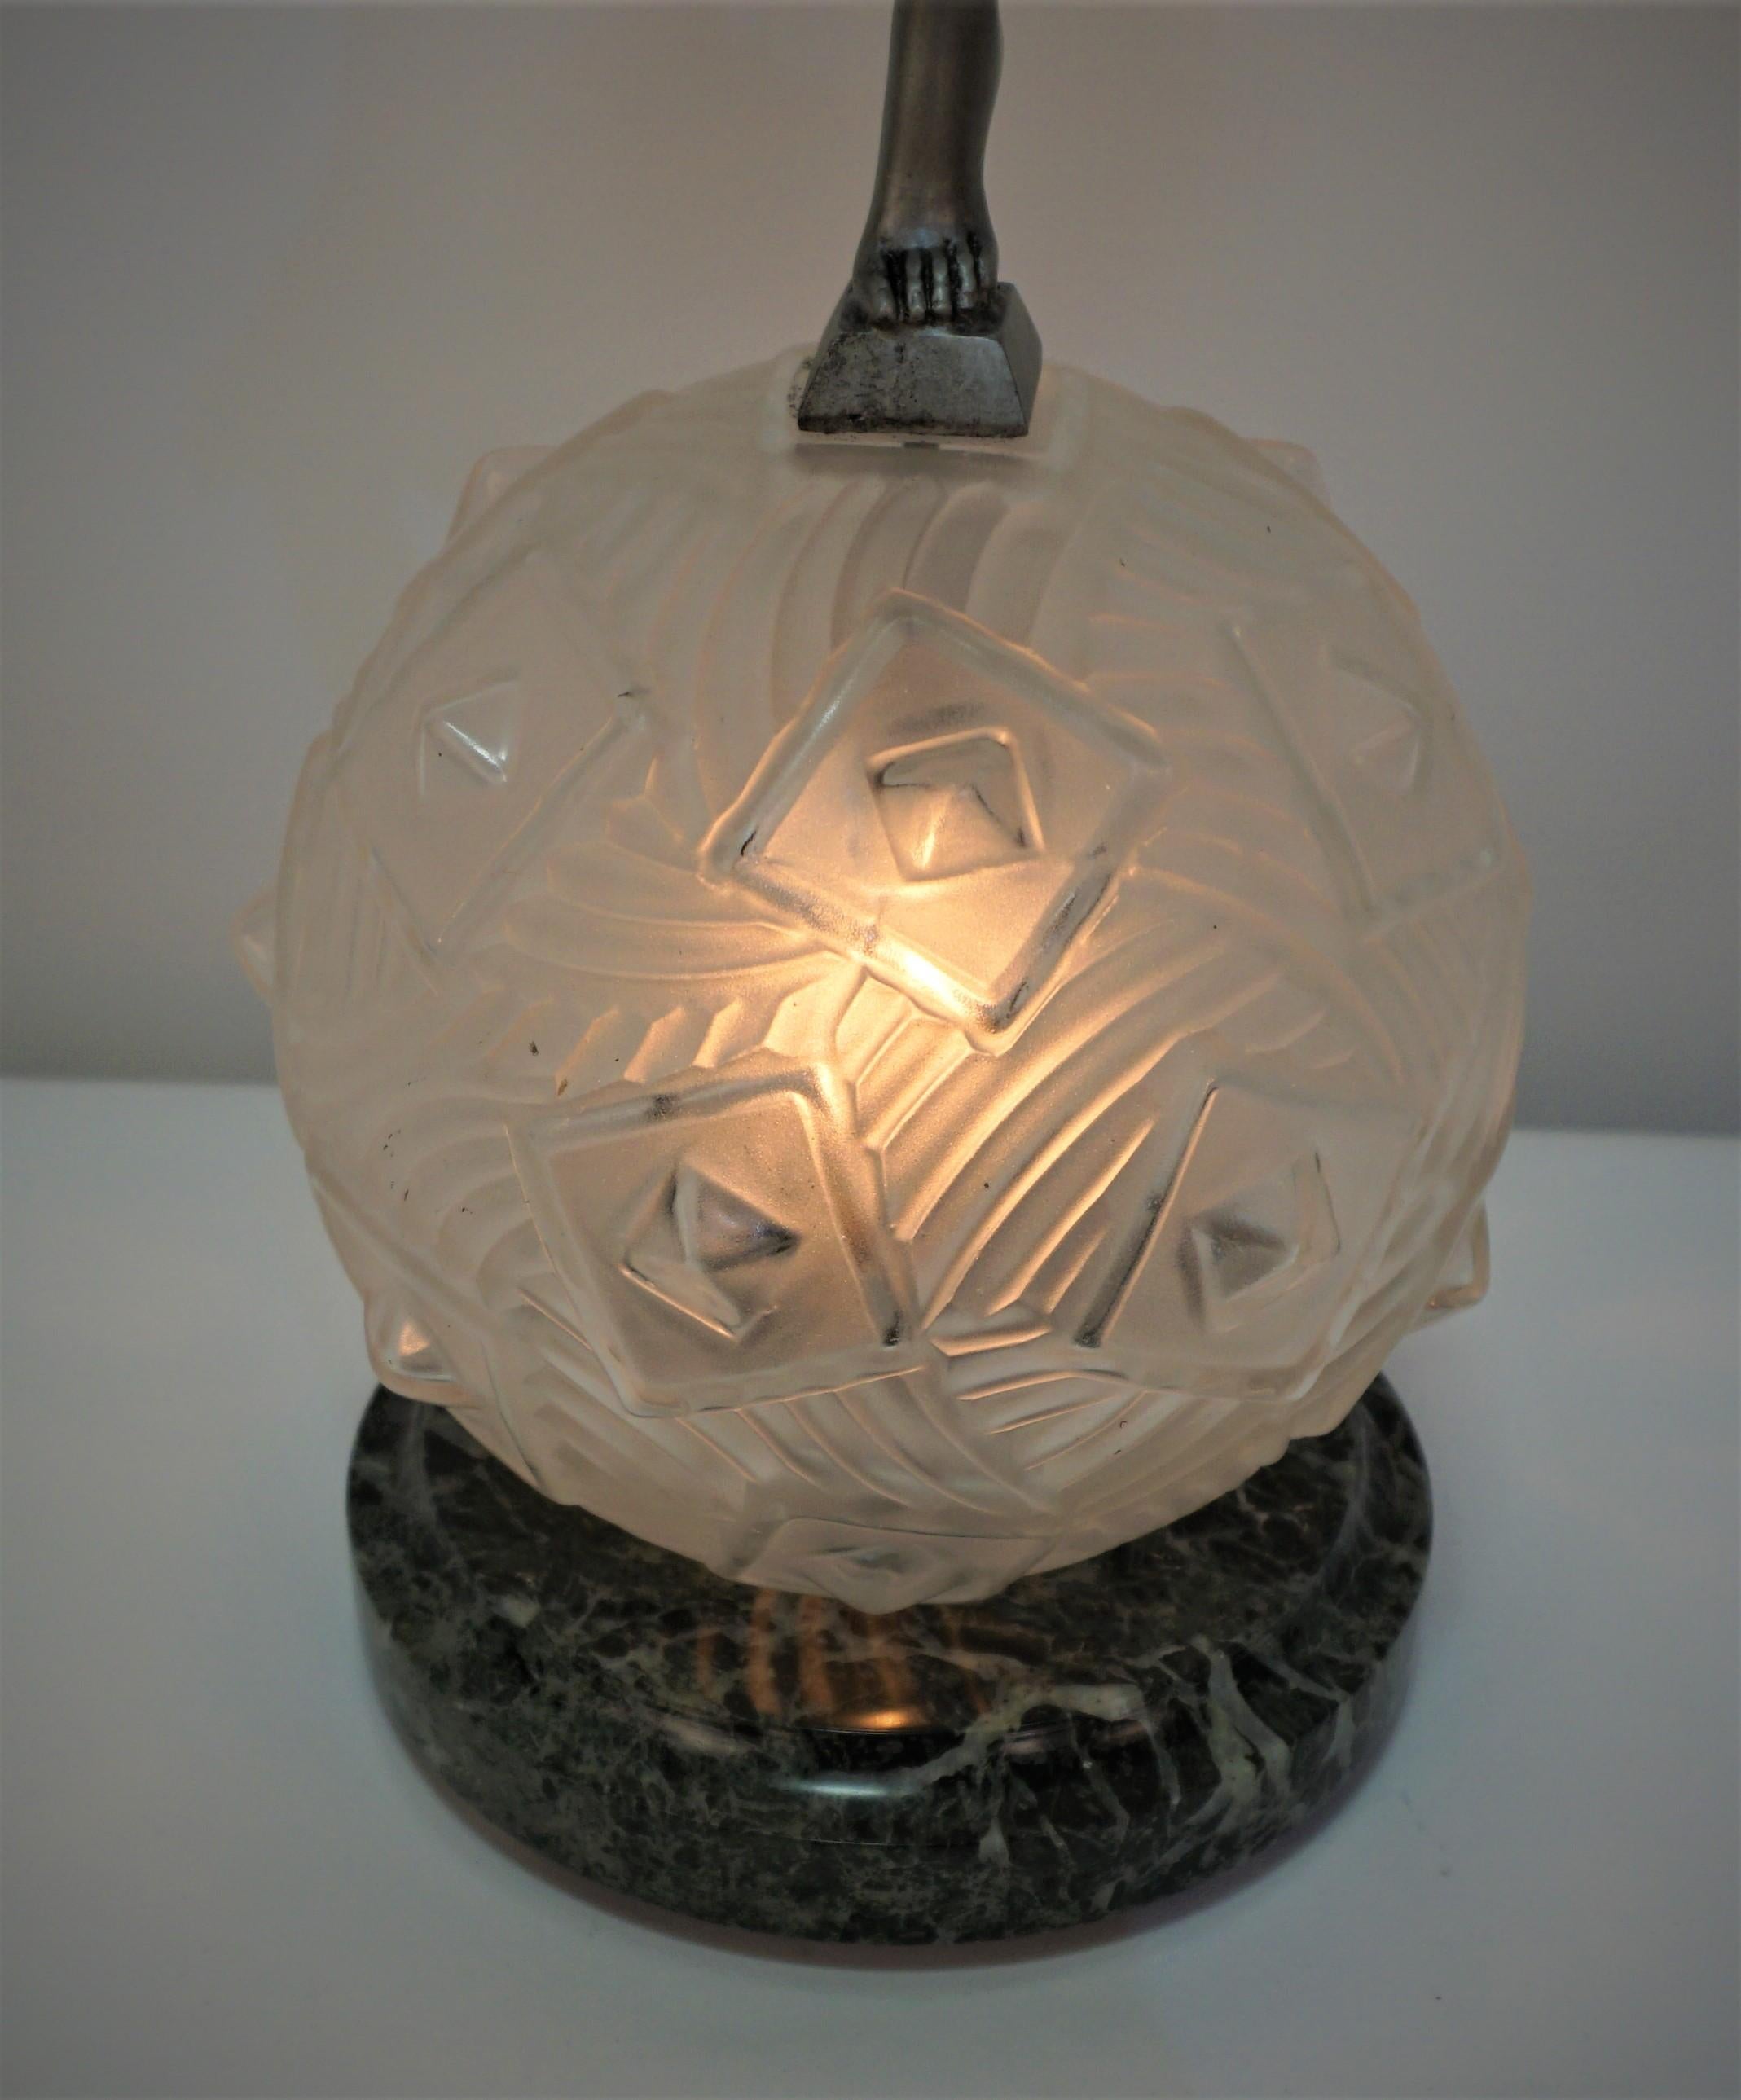 French 1920's Art Deco lamp, sculptural tambourine dancer over clear Frost geometric glass lampshade.